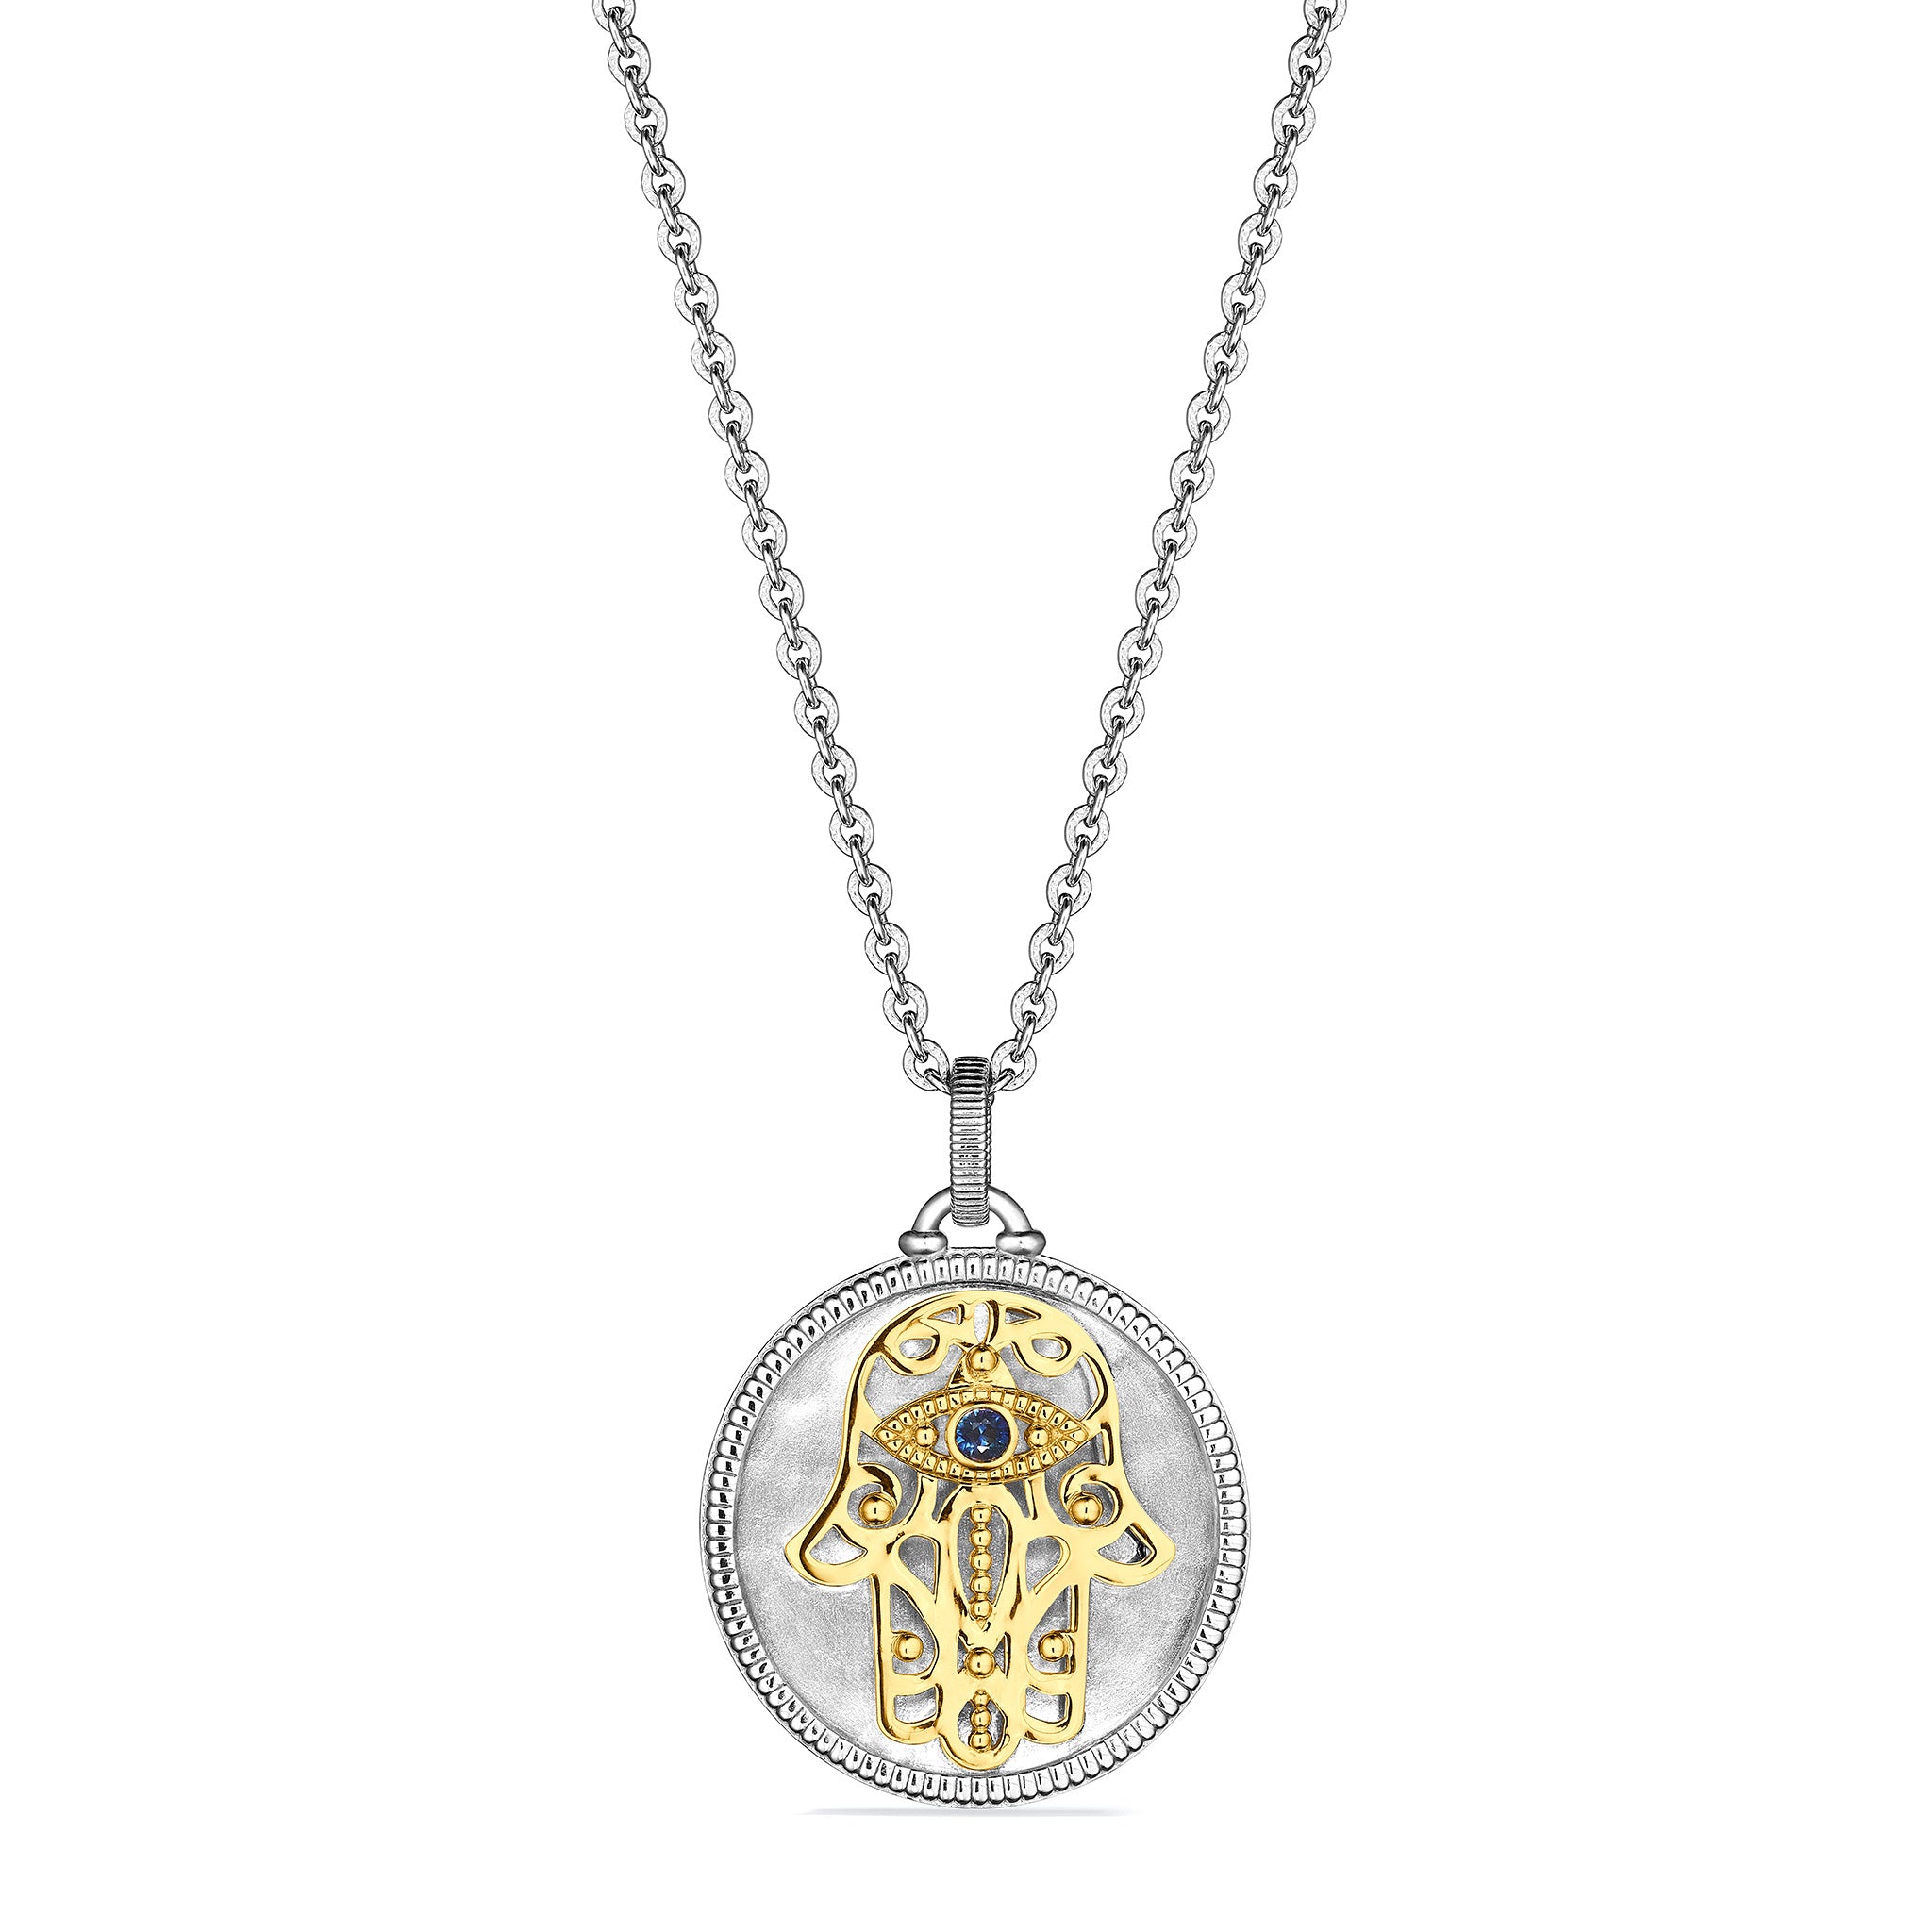 Little Luxuries Long Hamsa Medallion Necklace With Blue Sapphire, Diamonds And 18K Gold